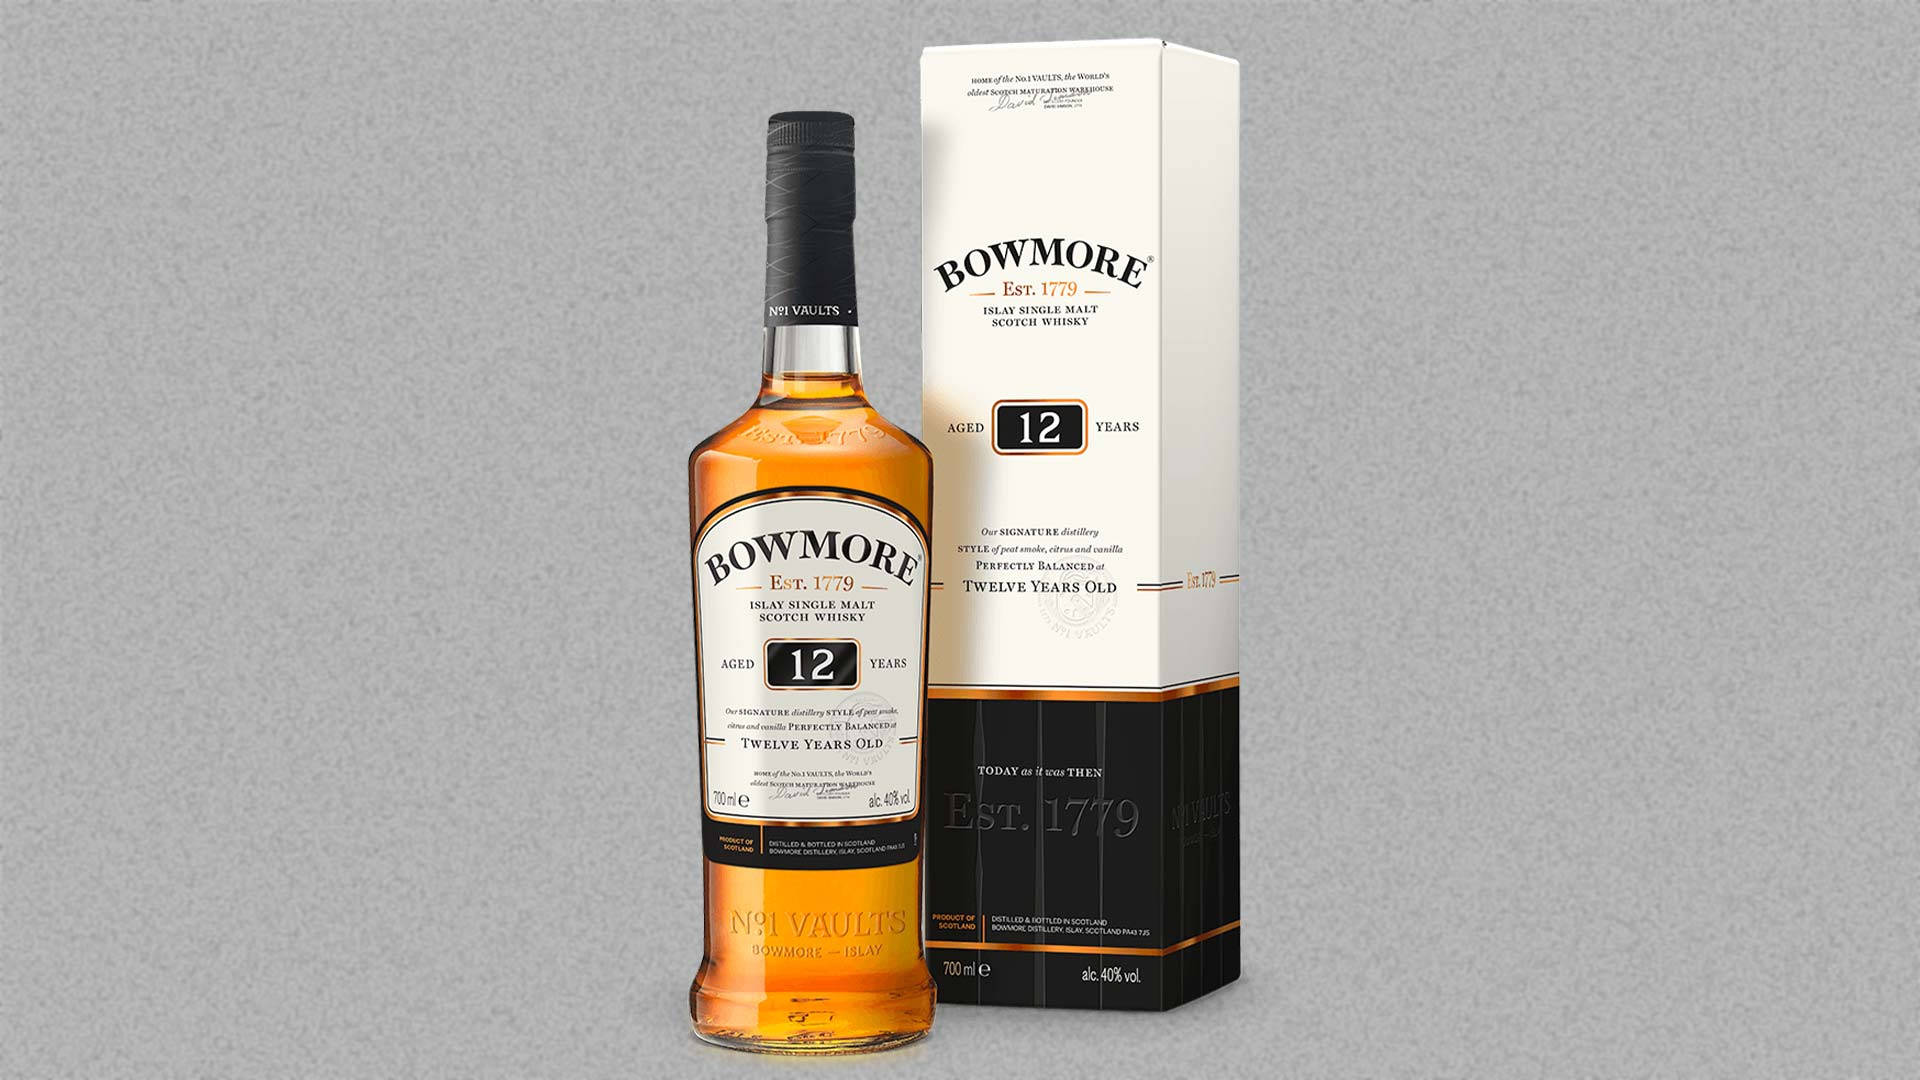 Bowmore 12 Years Old Scotch Whisky Bottle and Glass Wallpaper